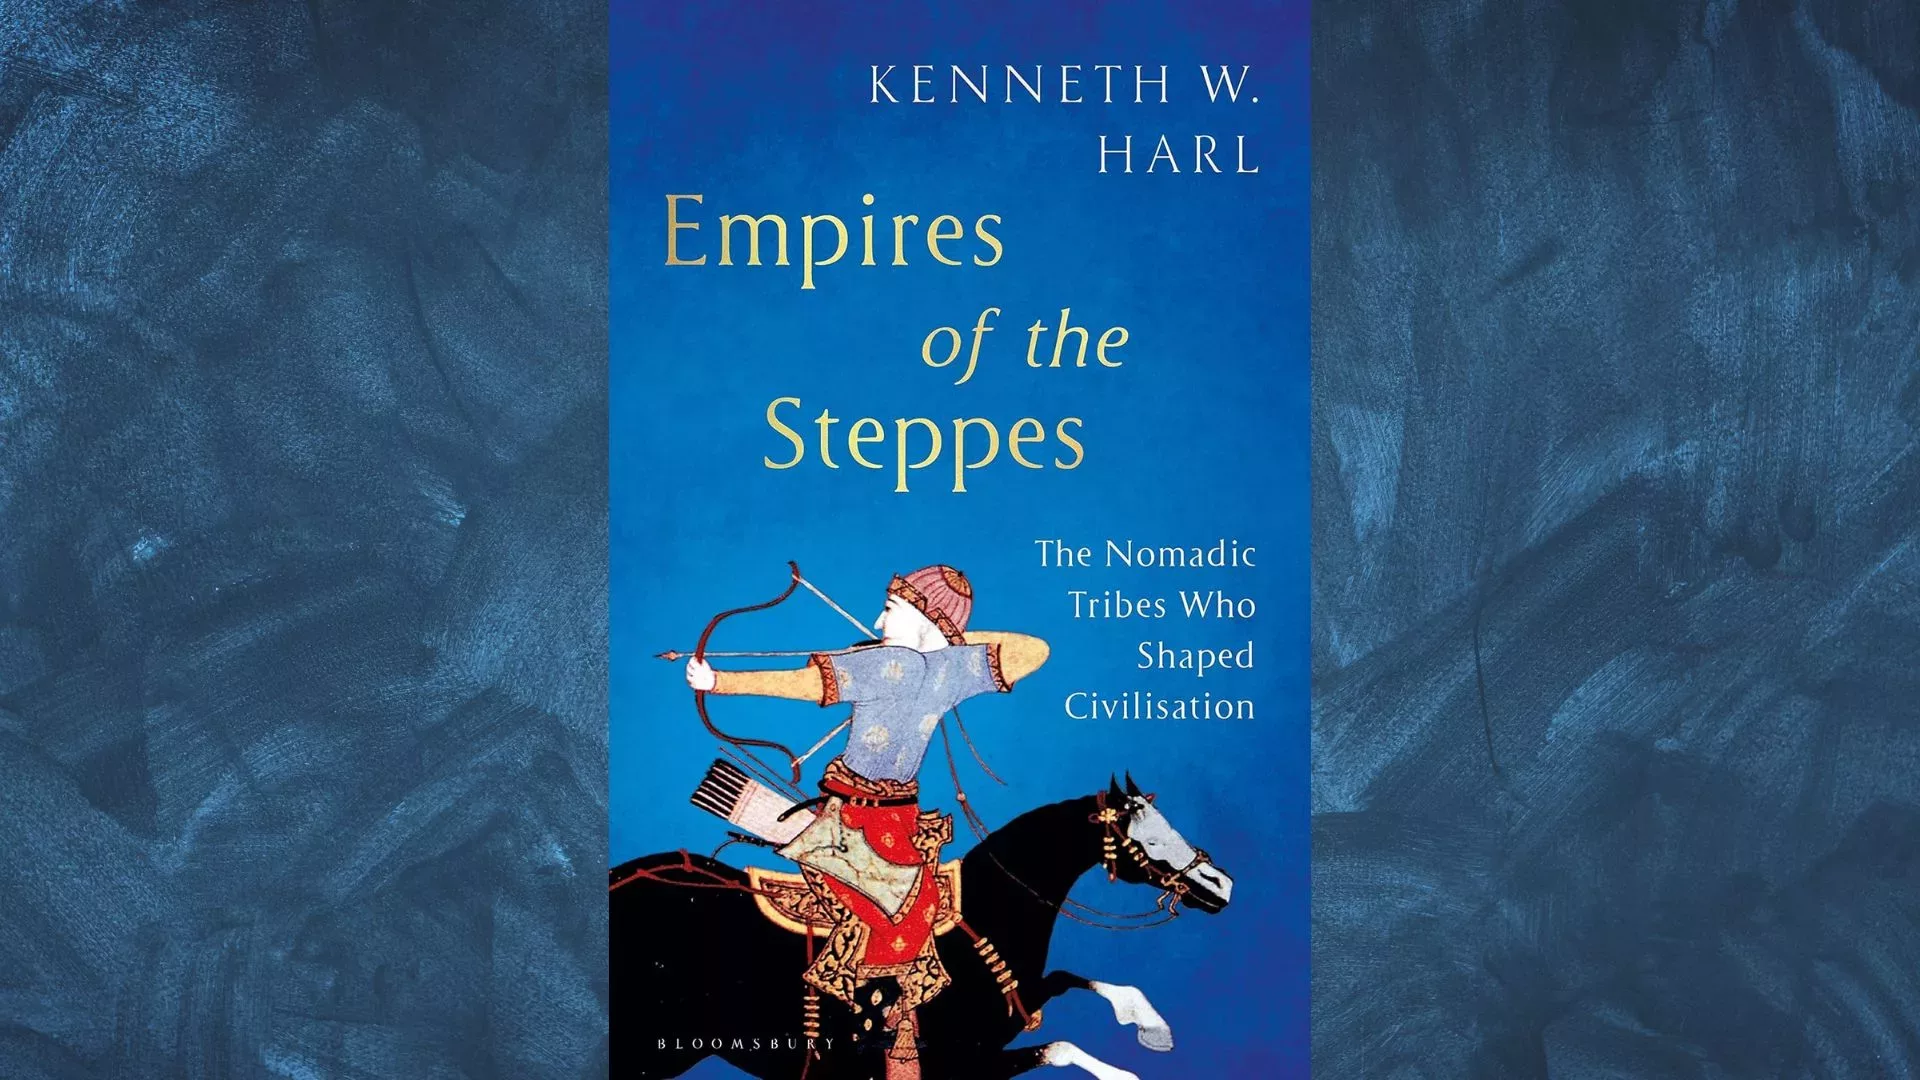 Empire of the Steppes